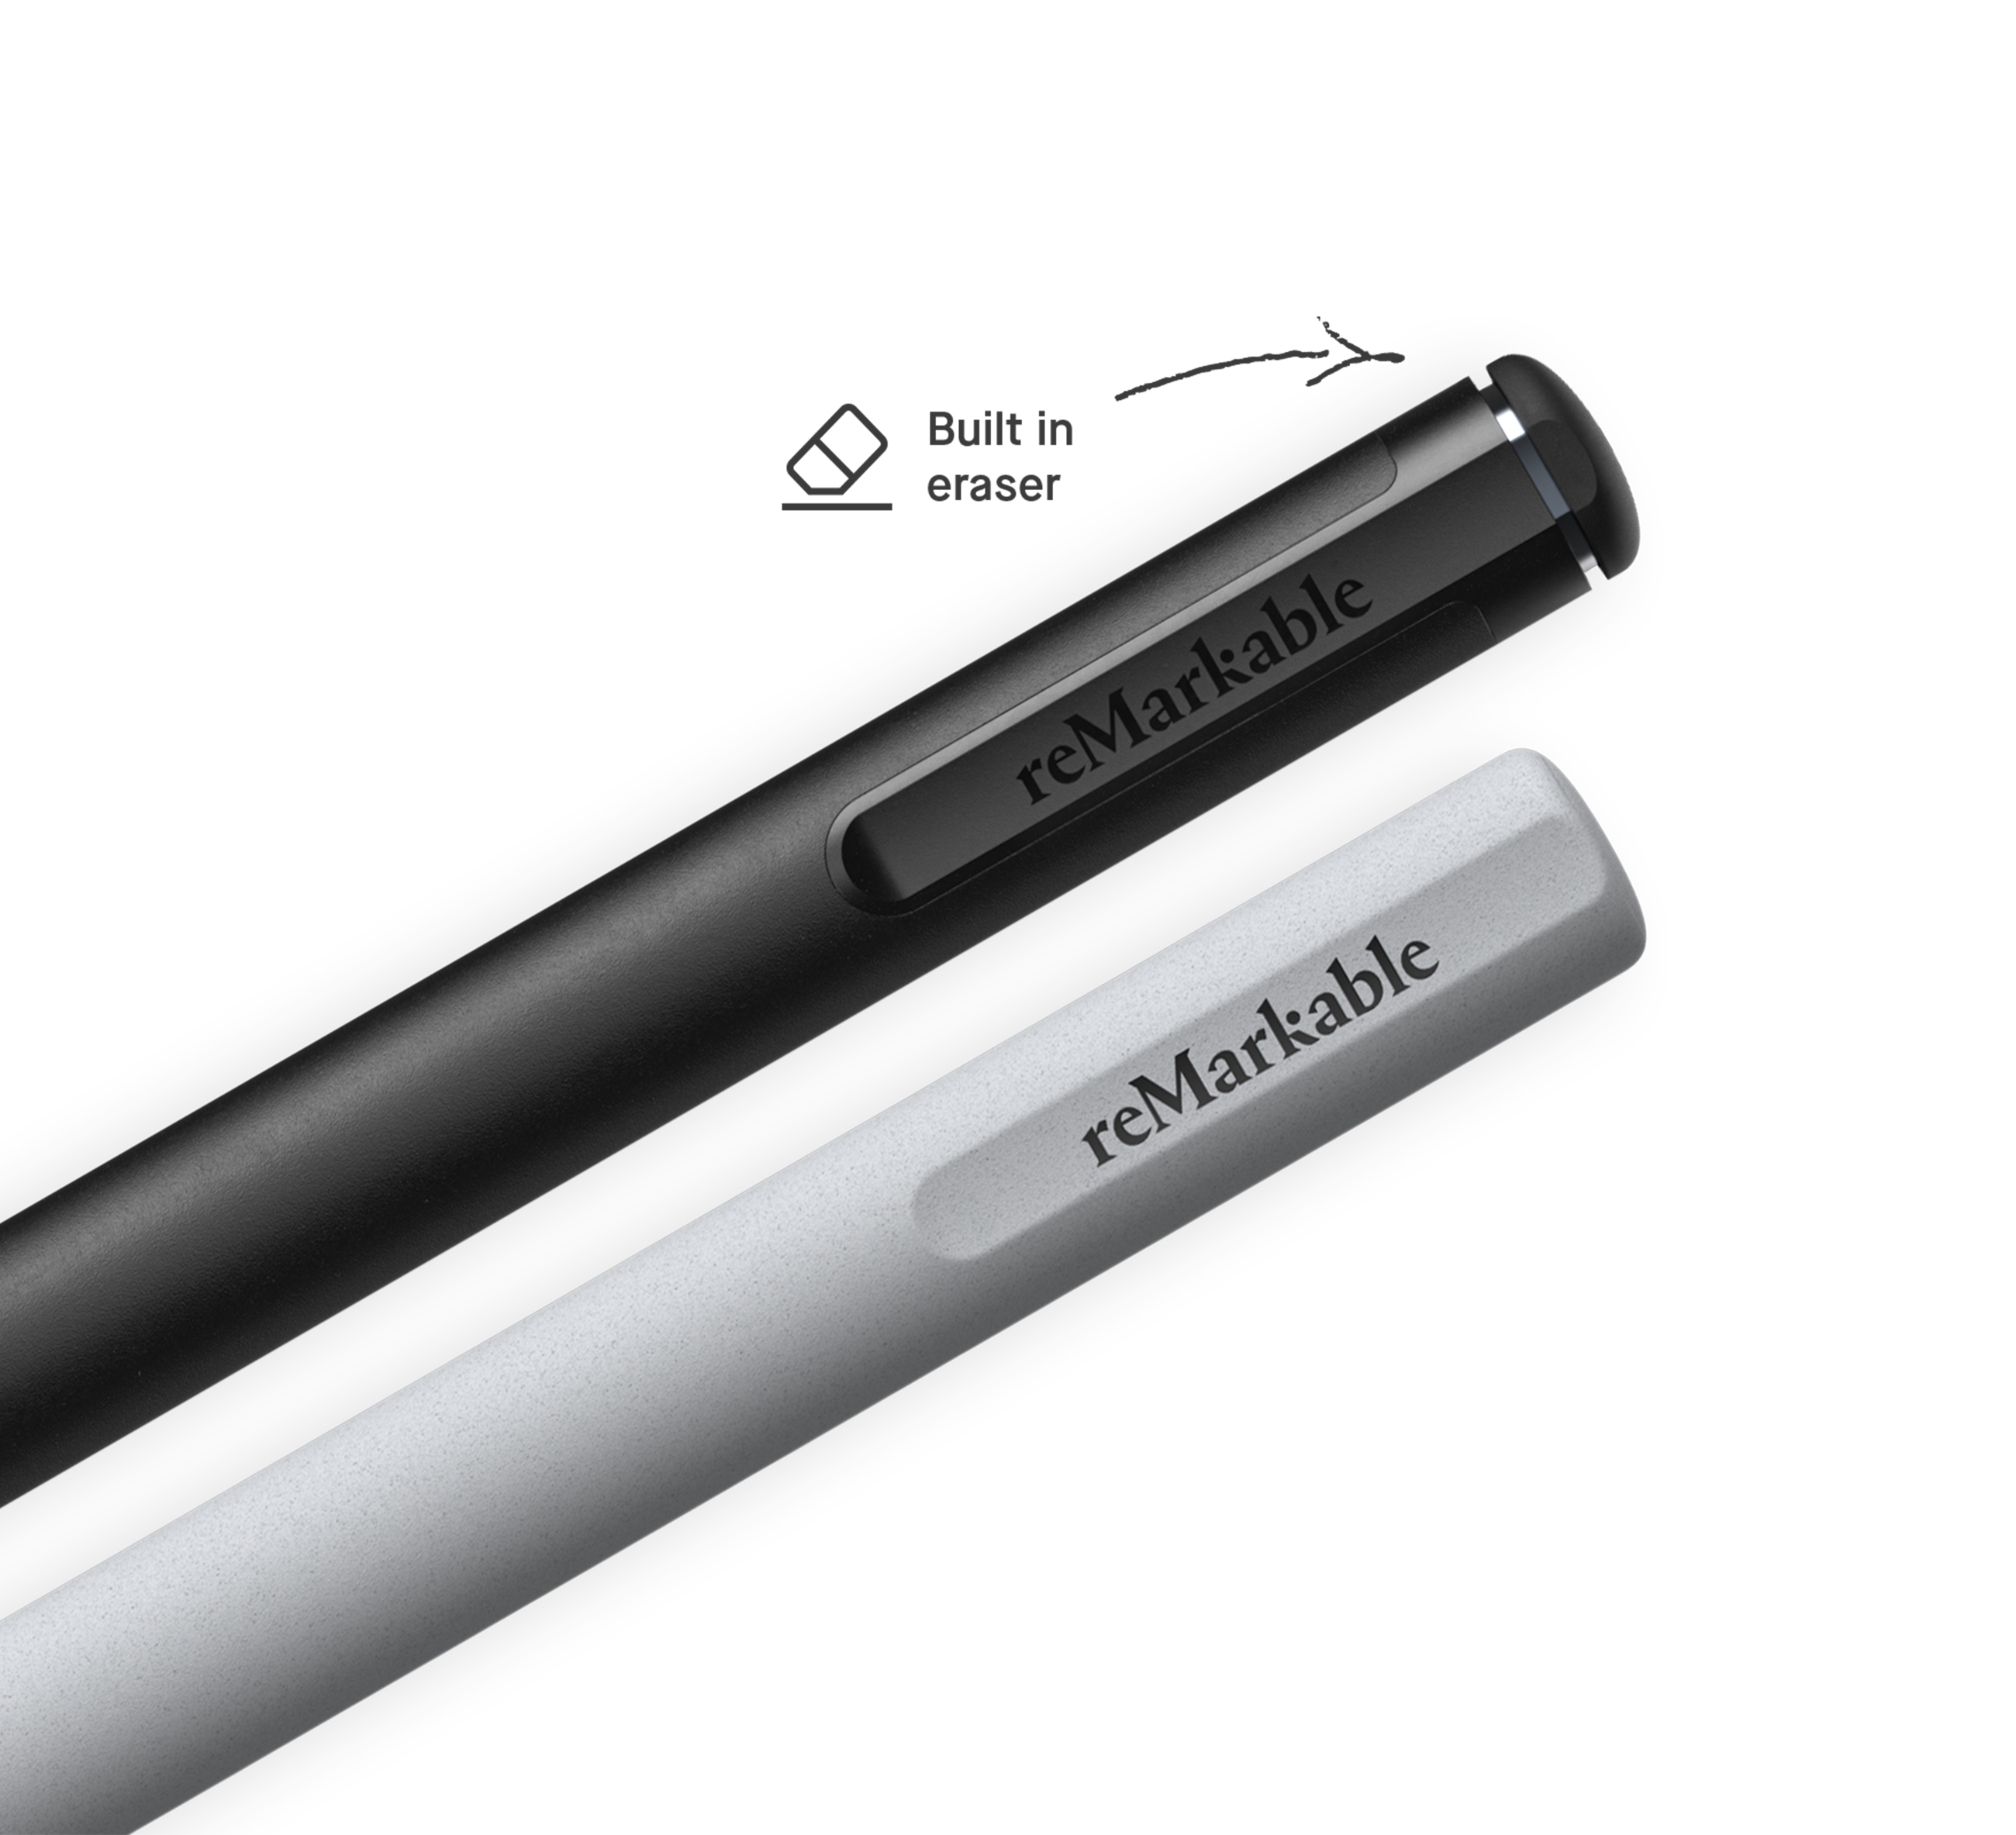 Remarkable 2 Marker Plus Pen with Eraser Review 